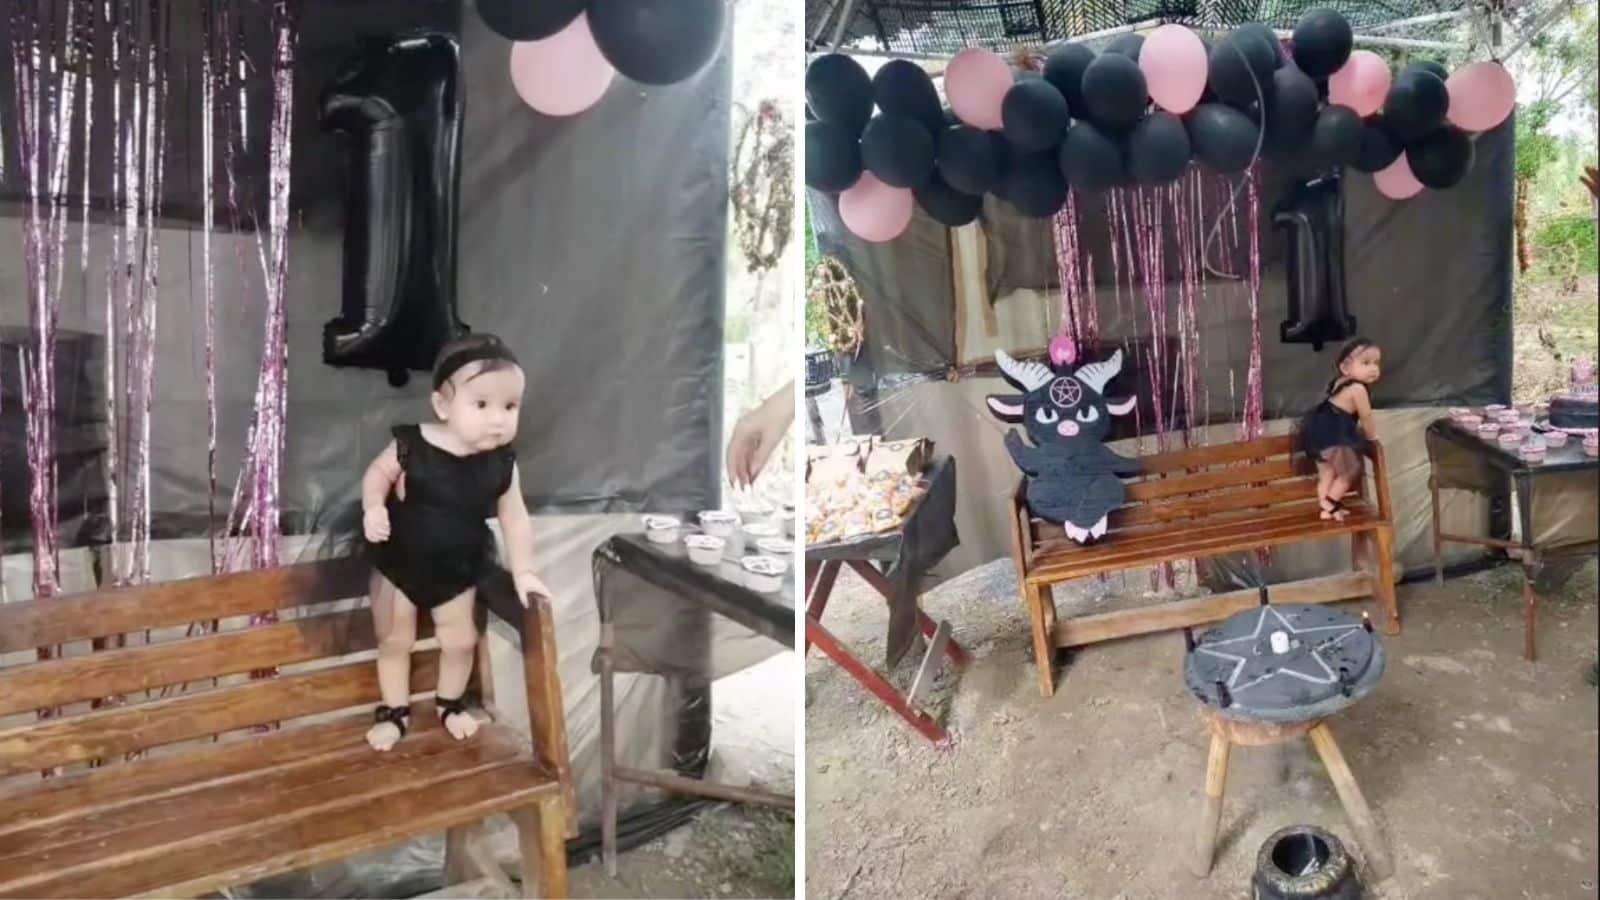 One-year-old's "satanic" birthday party